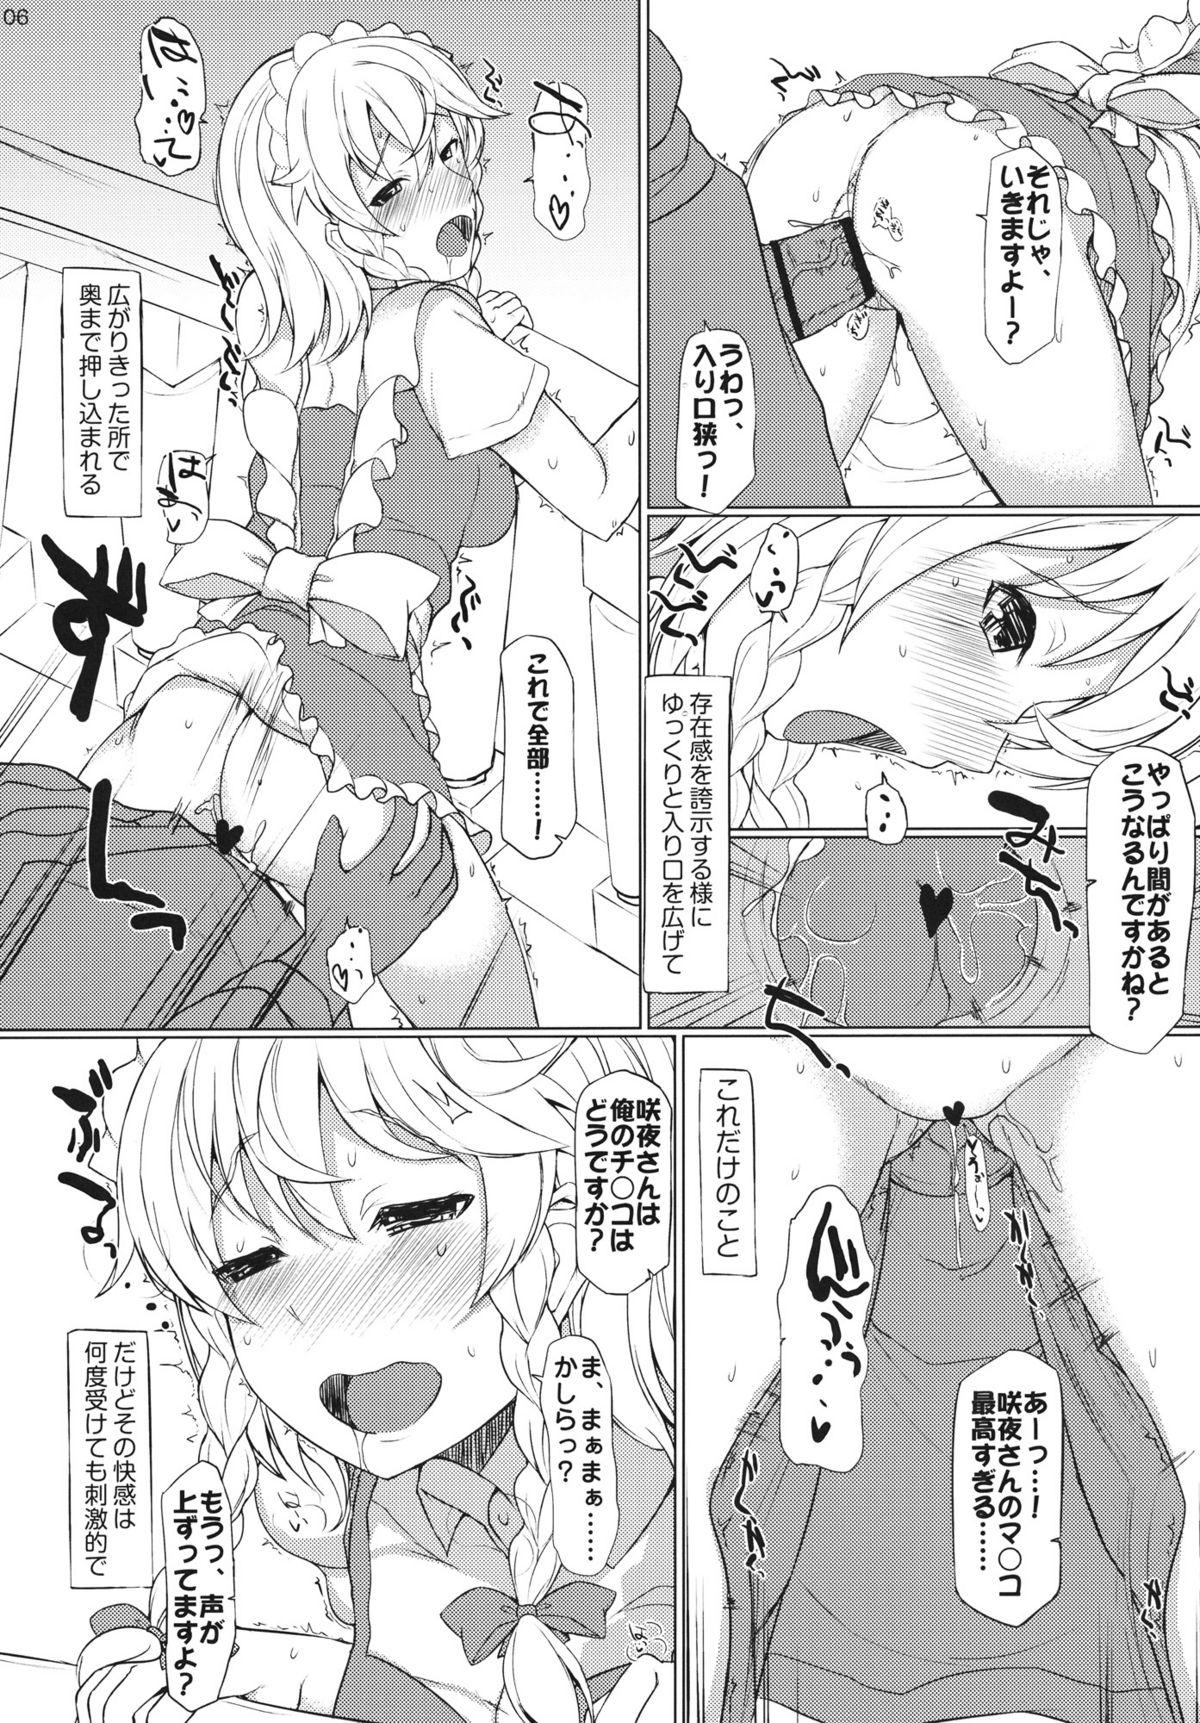 Free 18 Year Old Porn Fastlove - Touhou project Jeans - Page 5